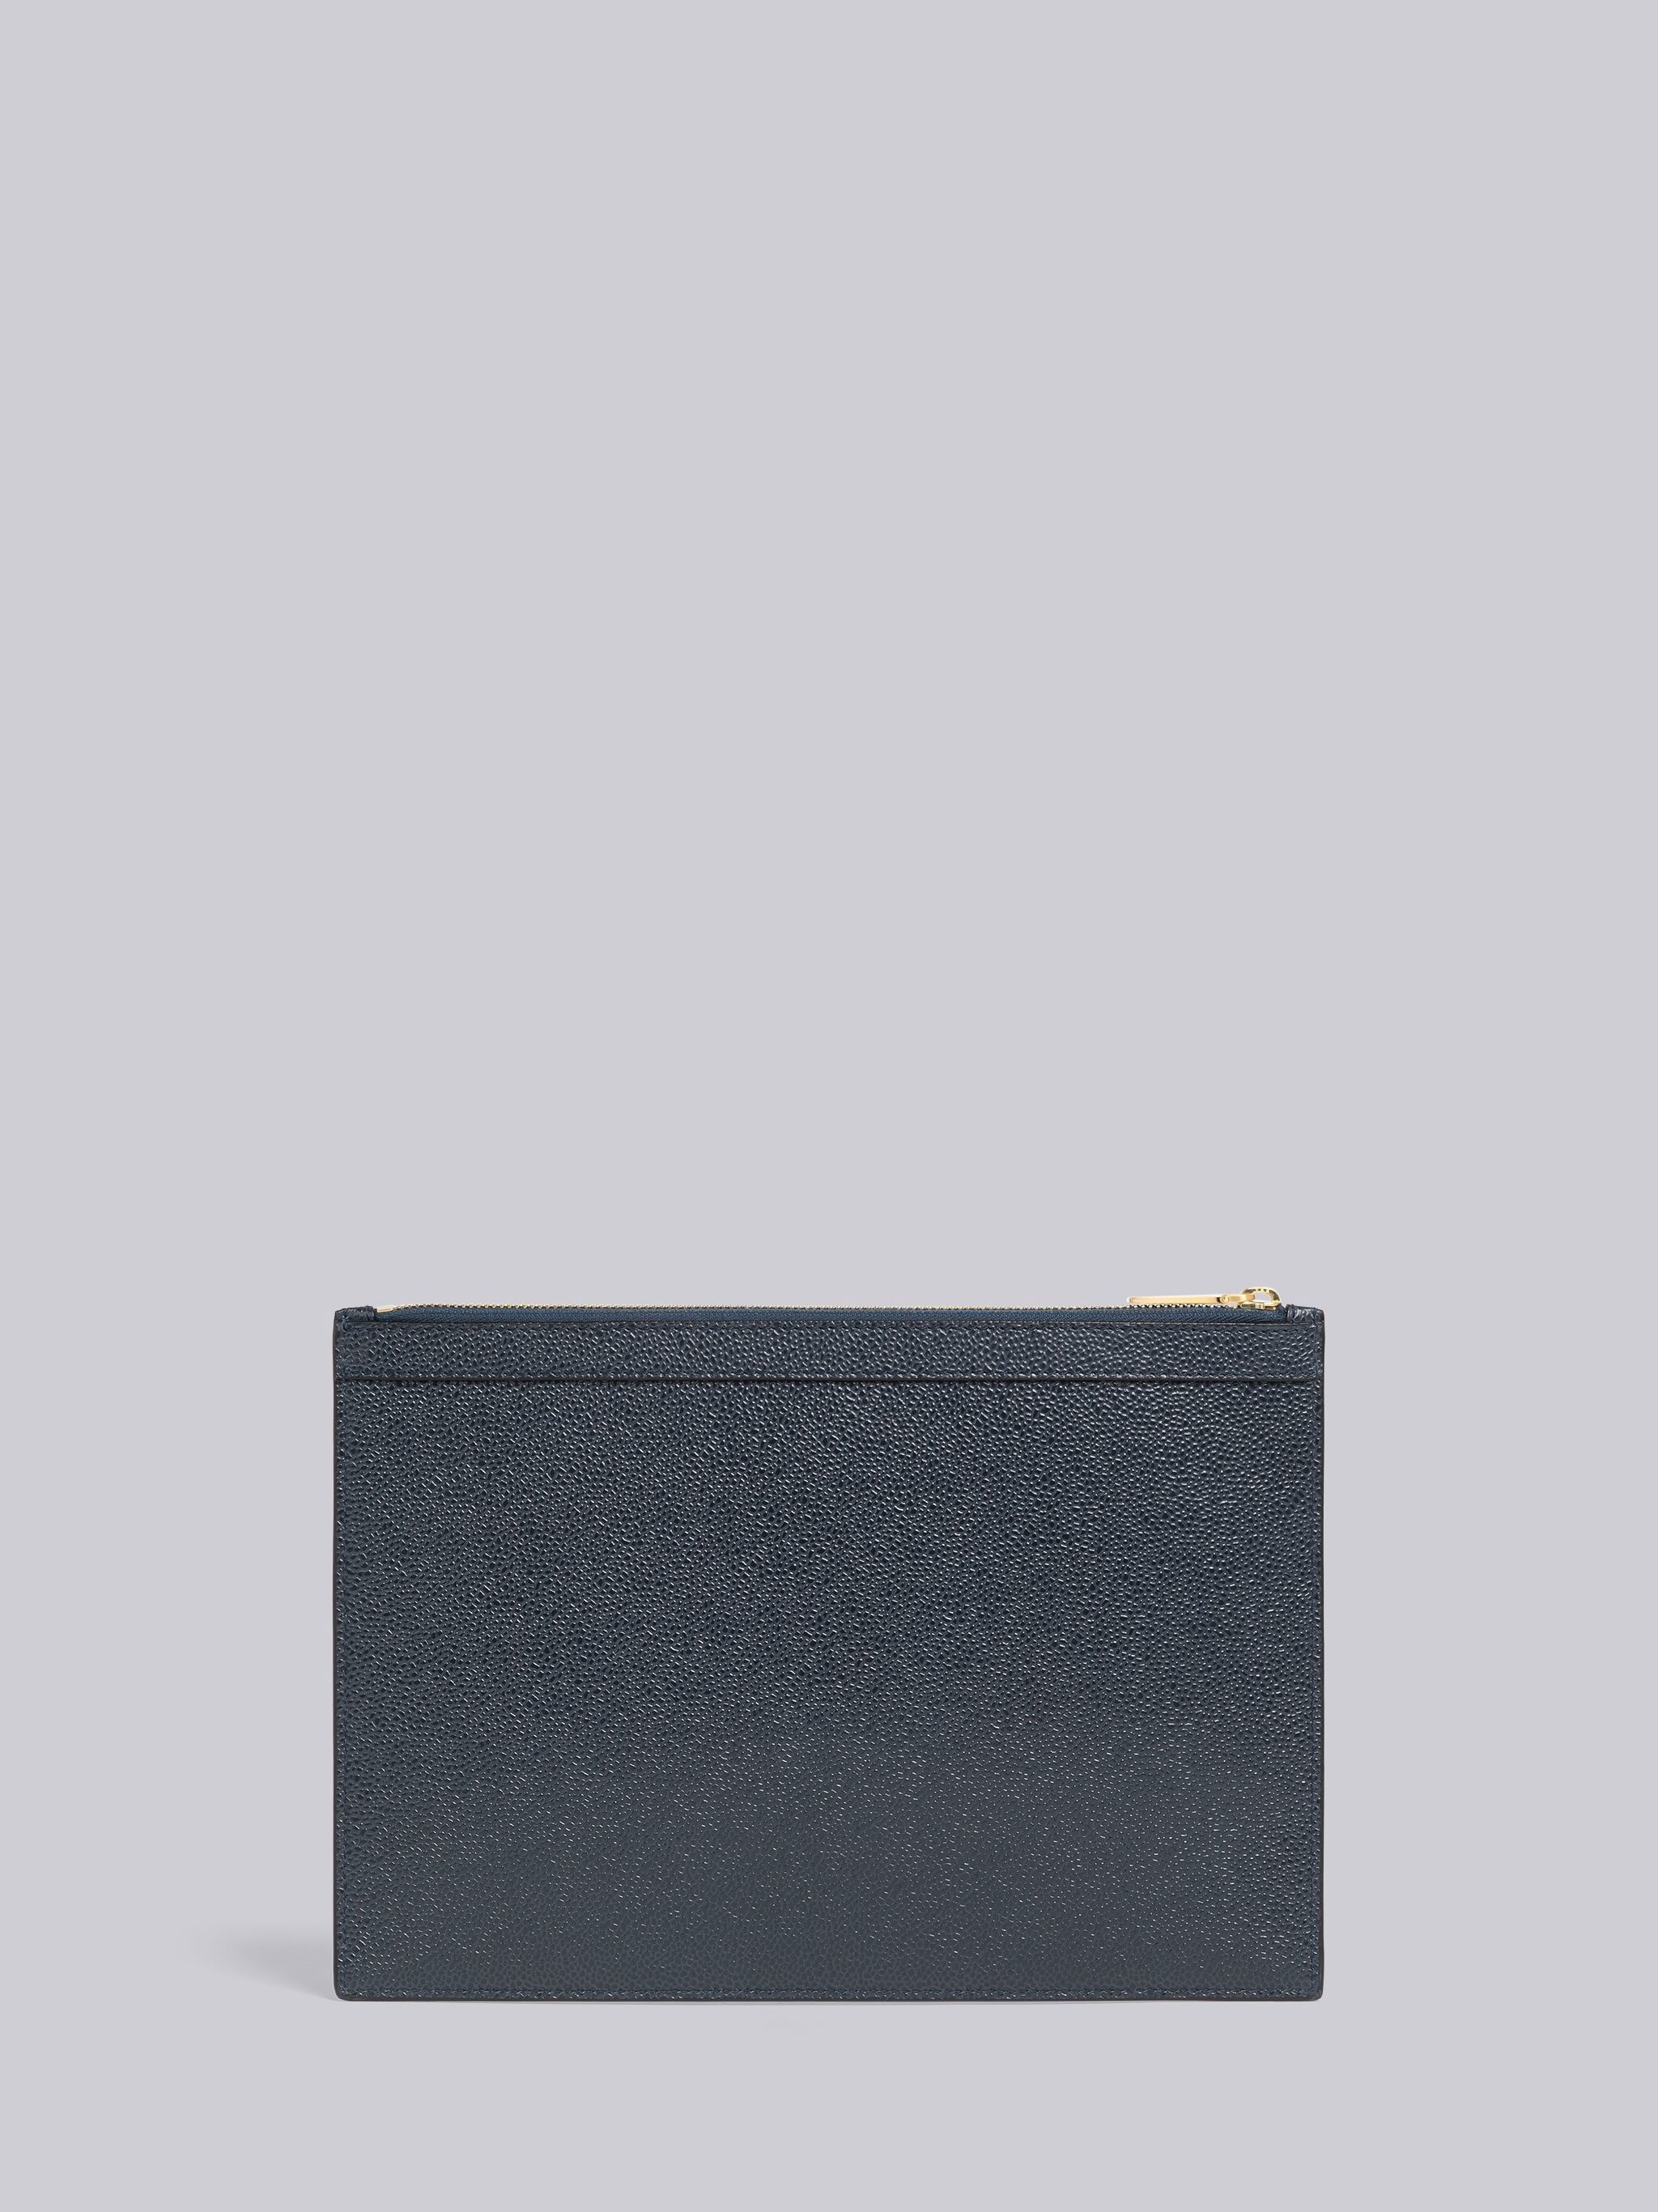 Pebble Grain Leather Anchor Small Document Holder - 3